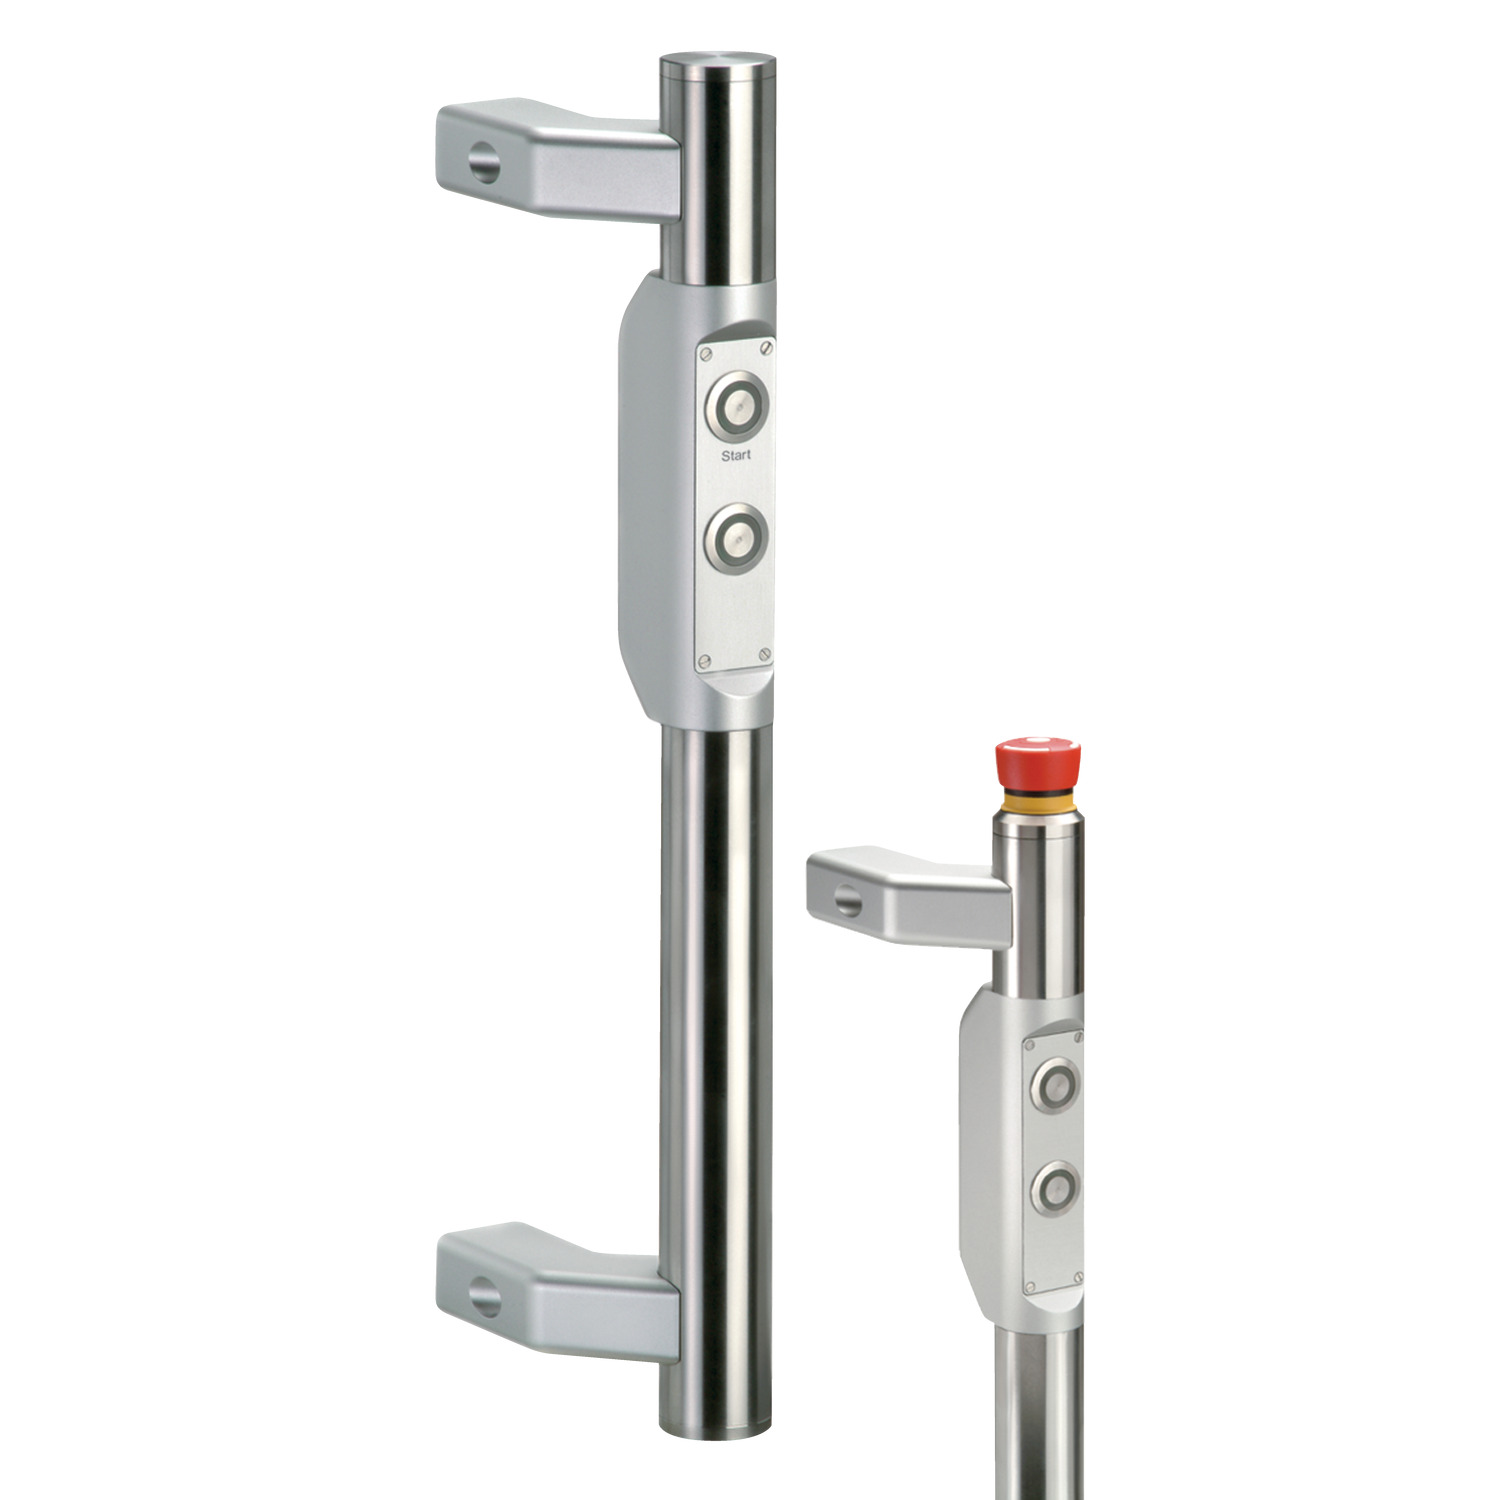 B8120.AC0102 Functional Handle - Electronic Type Two - Right. 2 Push Buttons - 8-pole (M12 x 1)